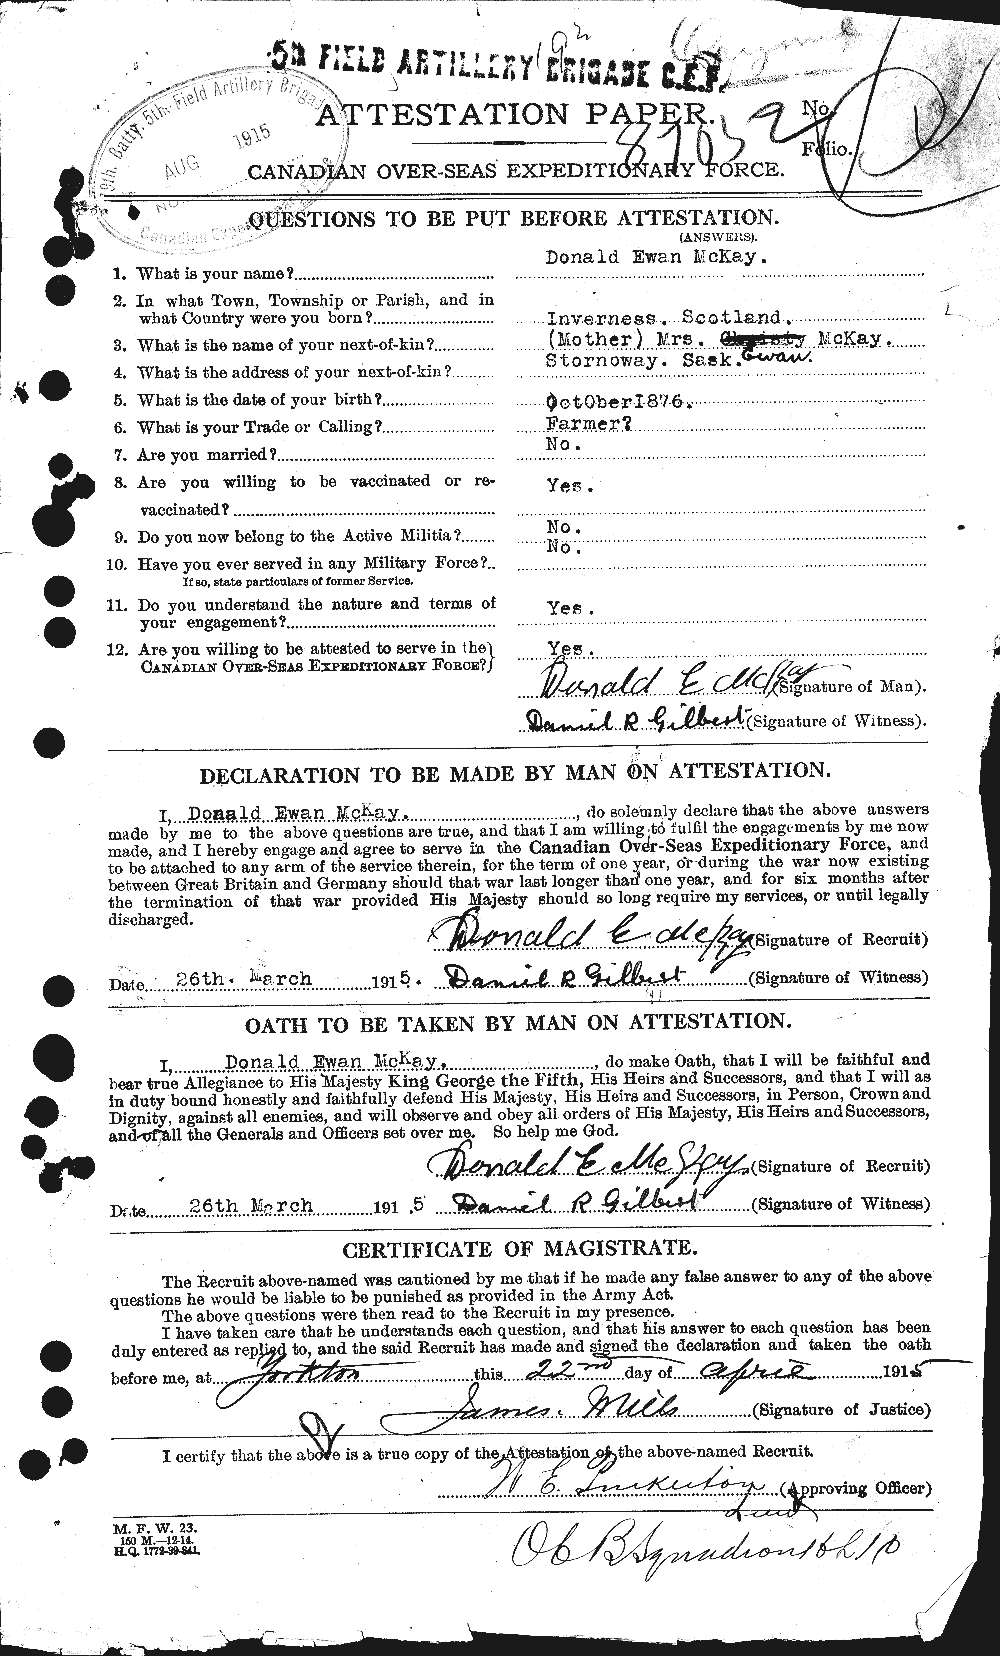 Personnel Records of the First World War - CEF 531175a